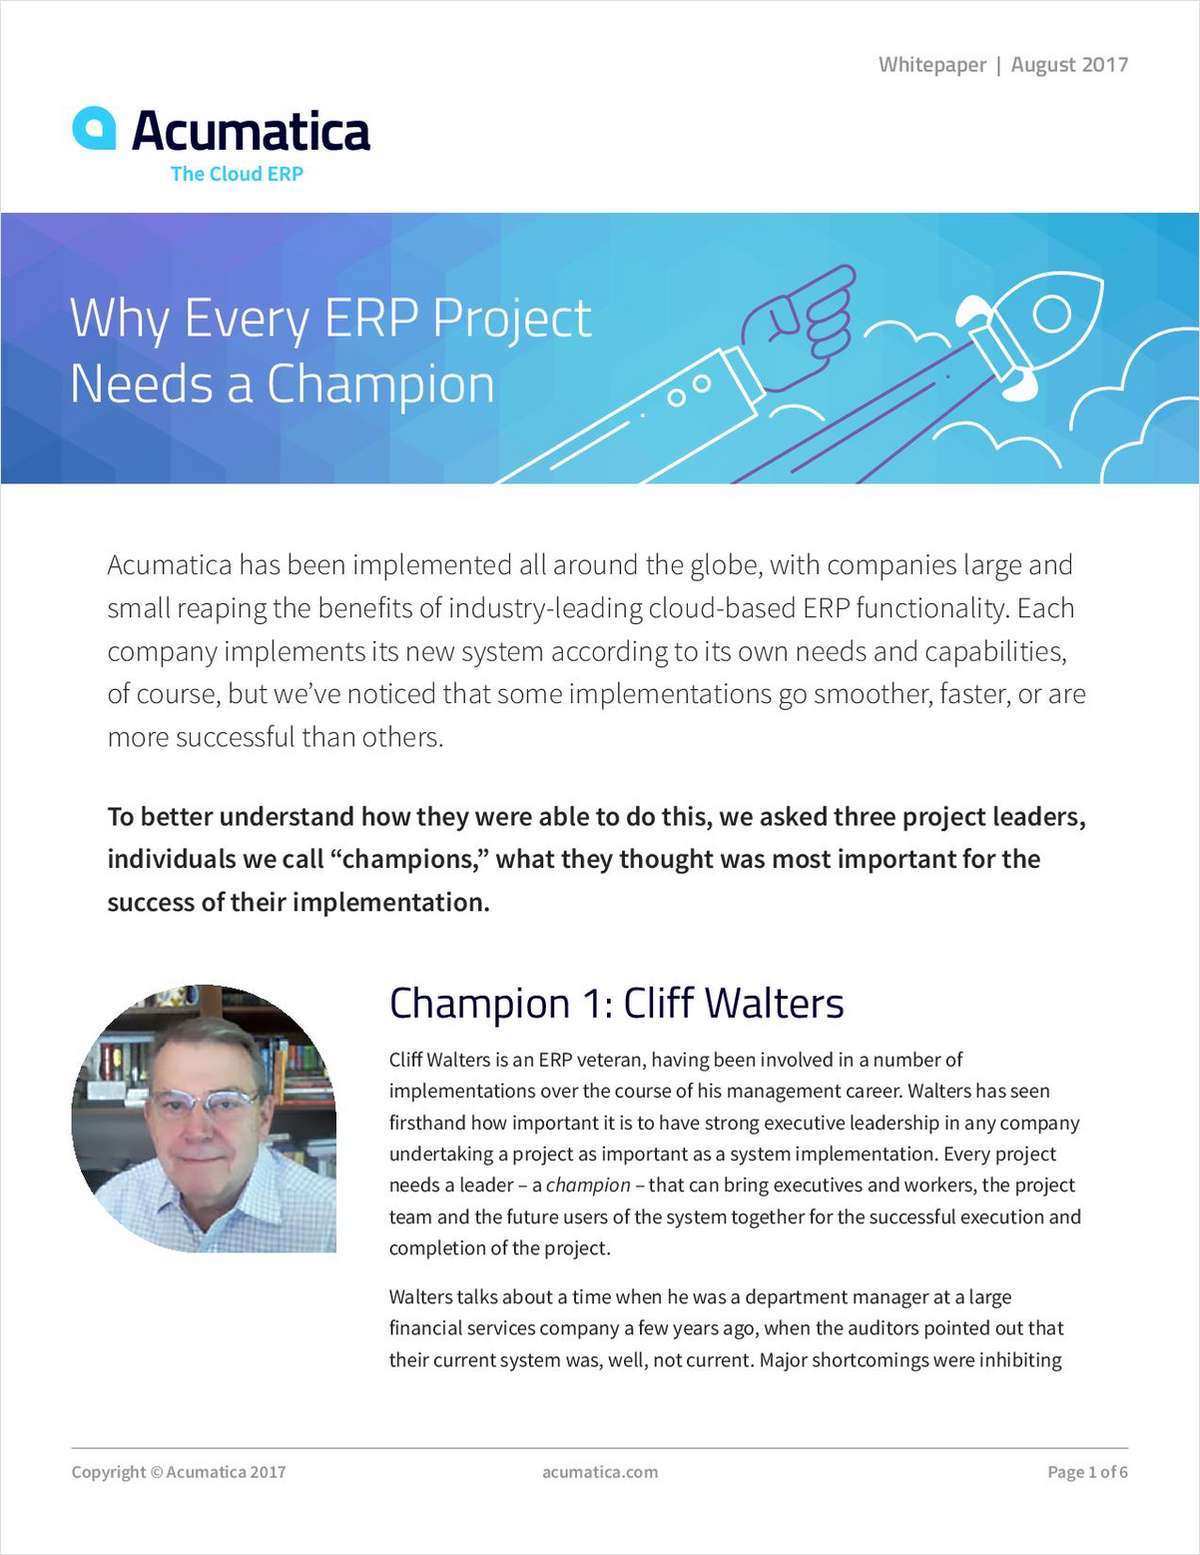 Why Every ERP Project Needs a Champion